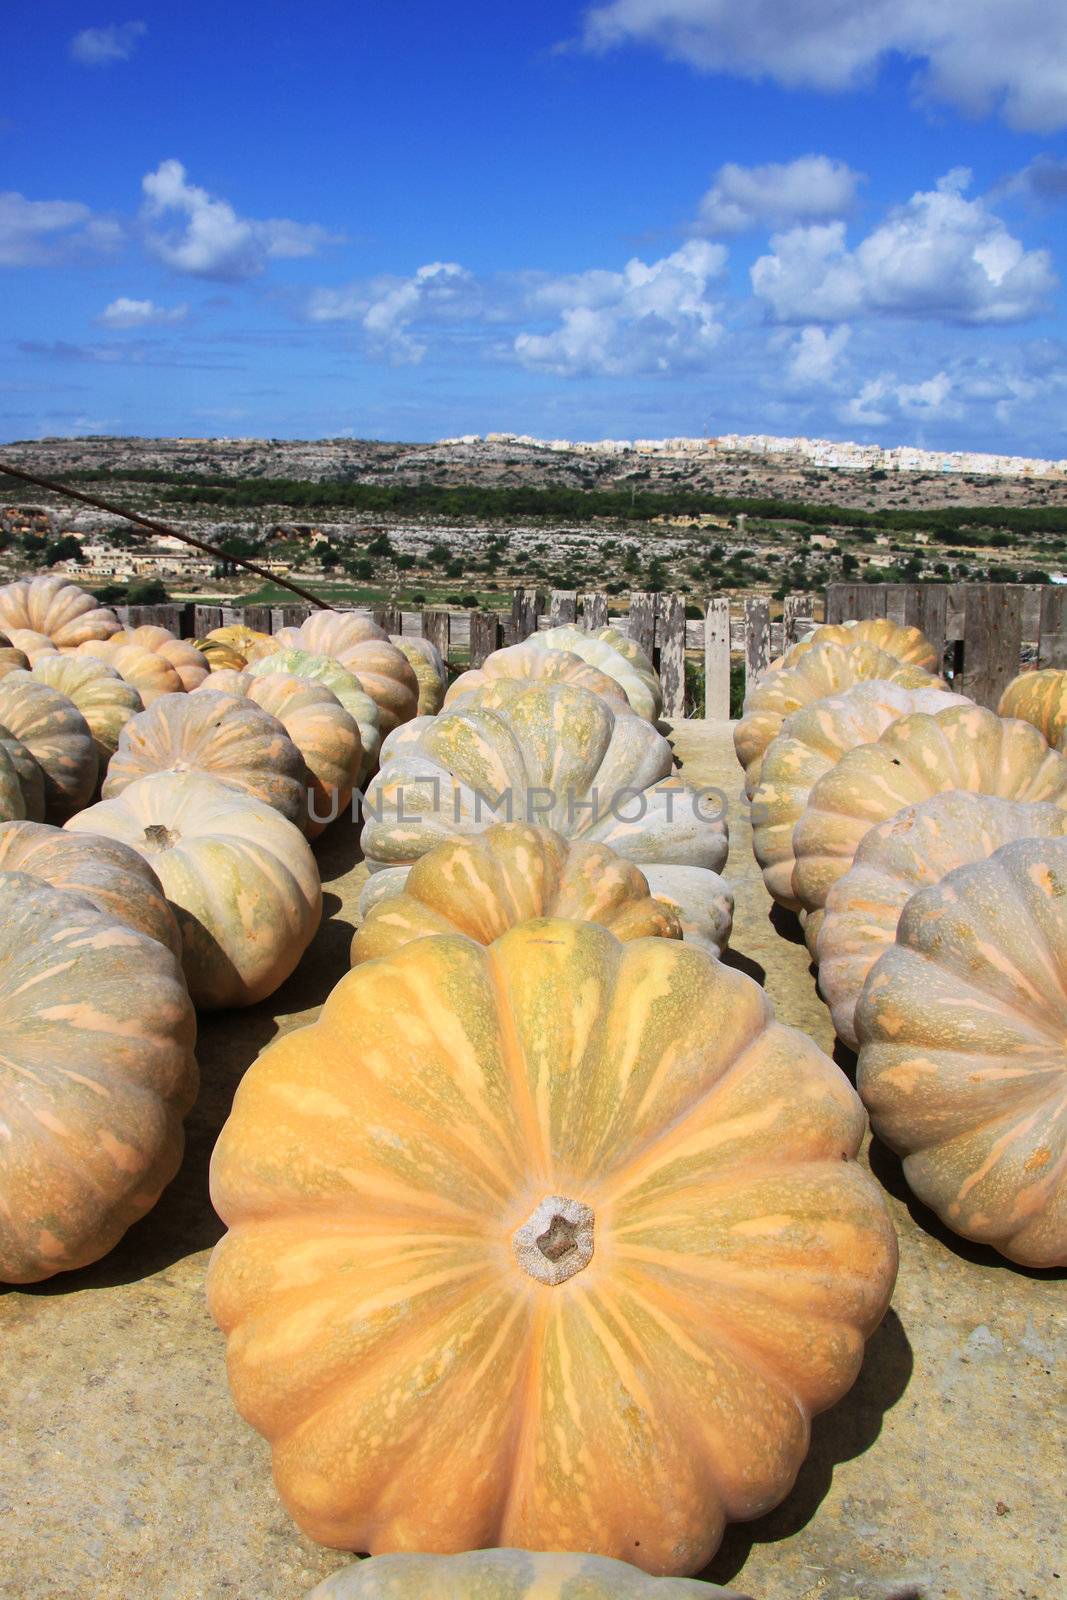 Round pumpkins lade out in rows on a roof in Malta to dry in the sun